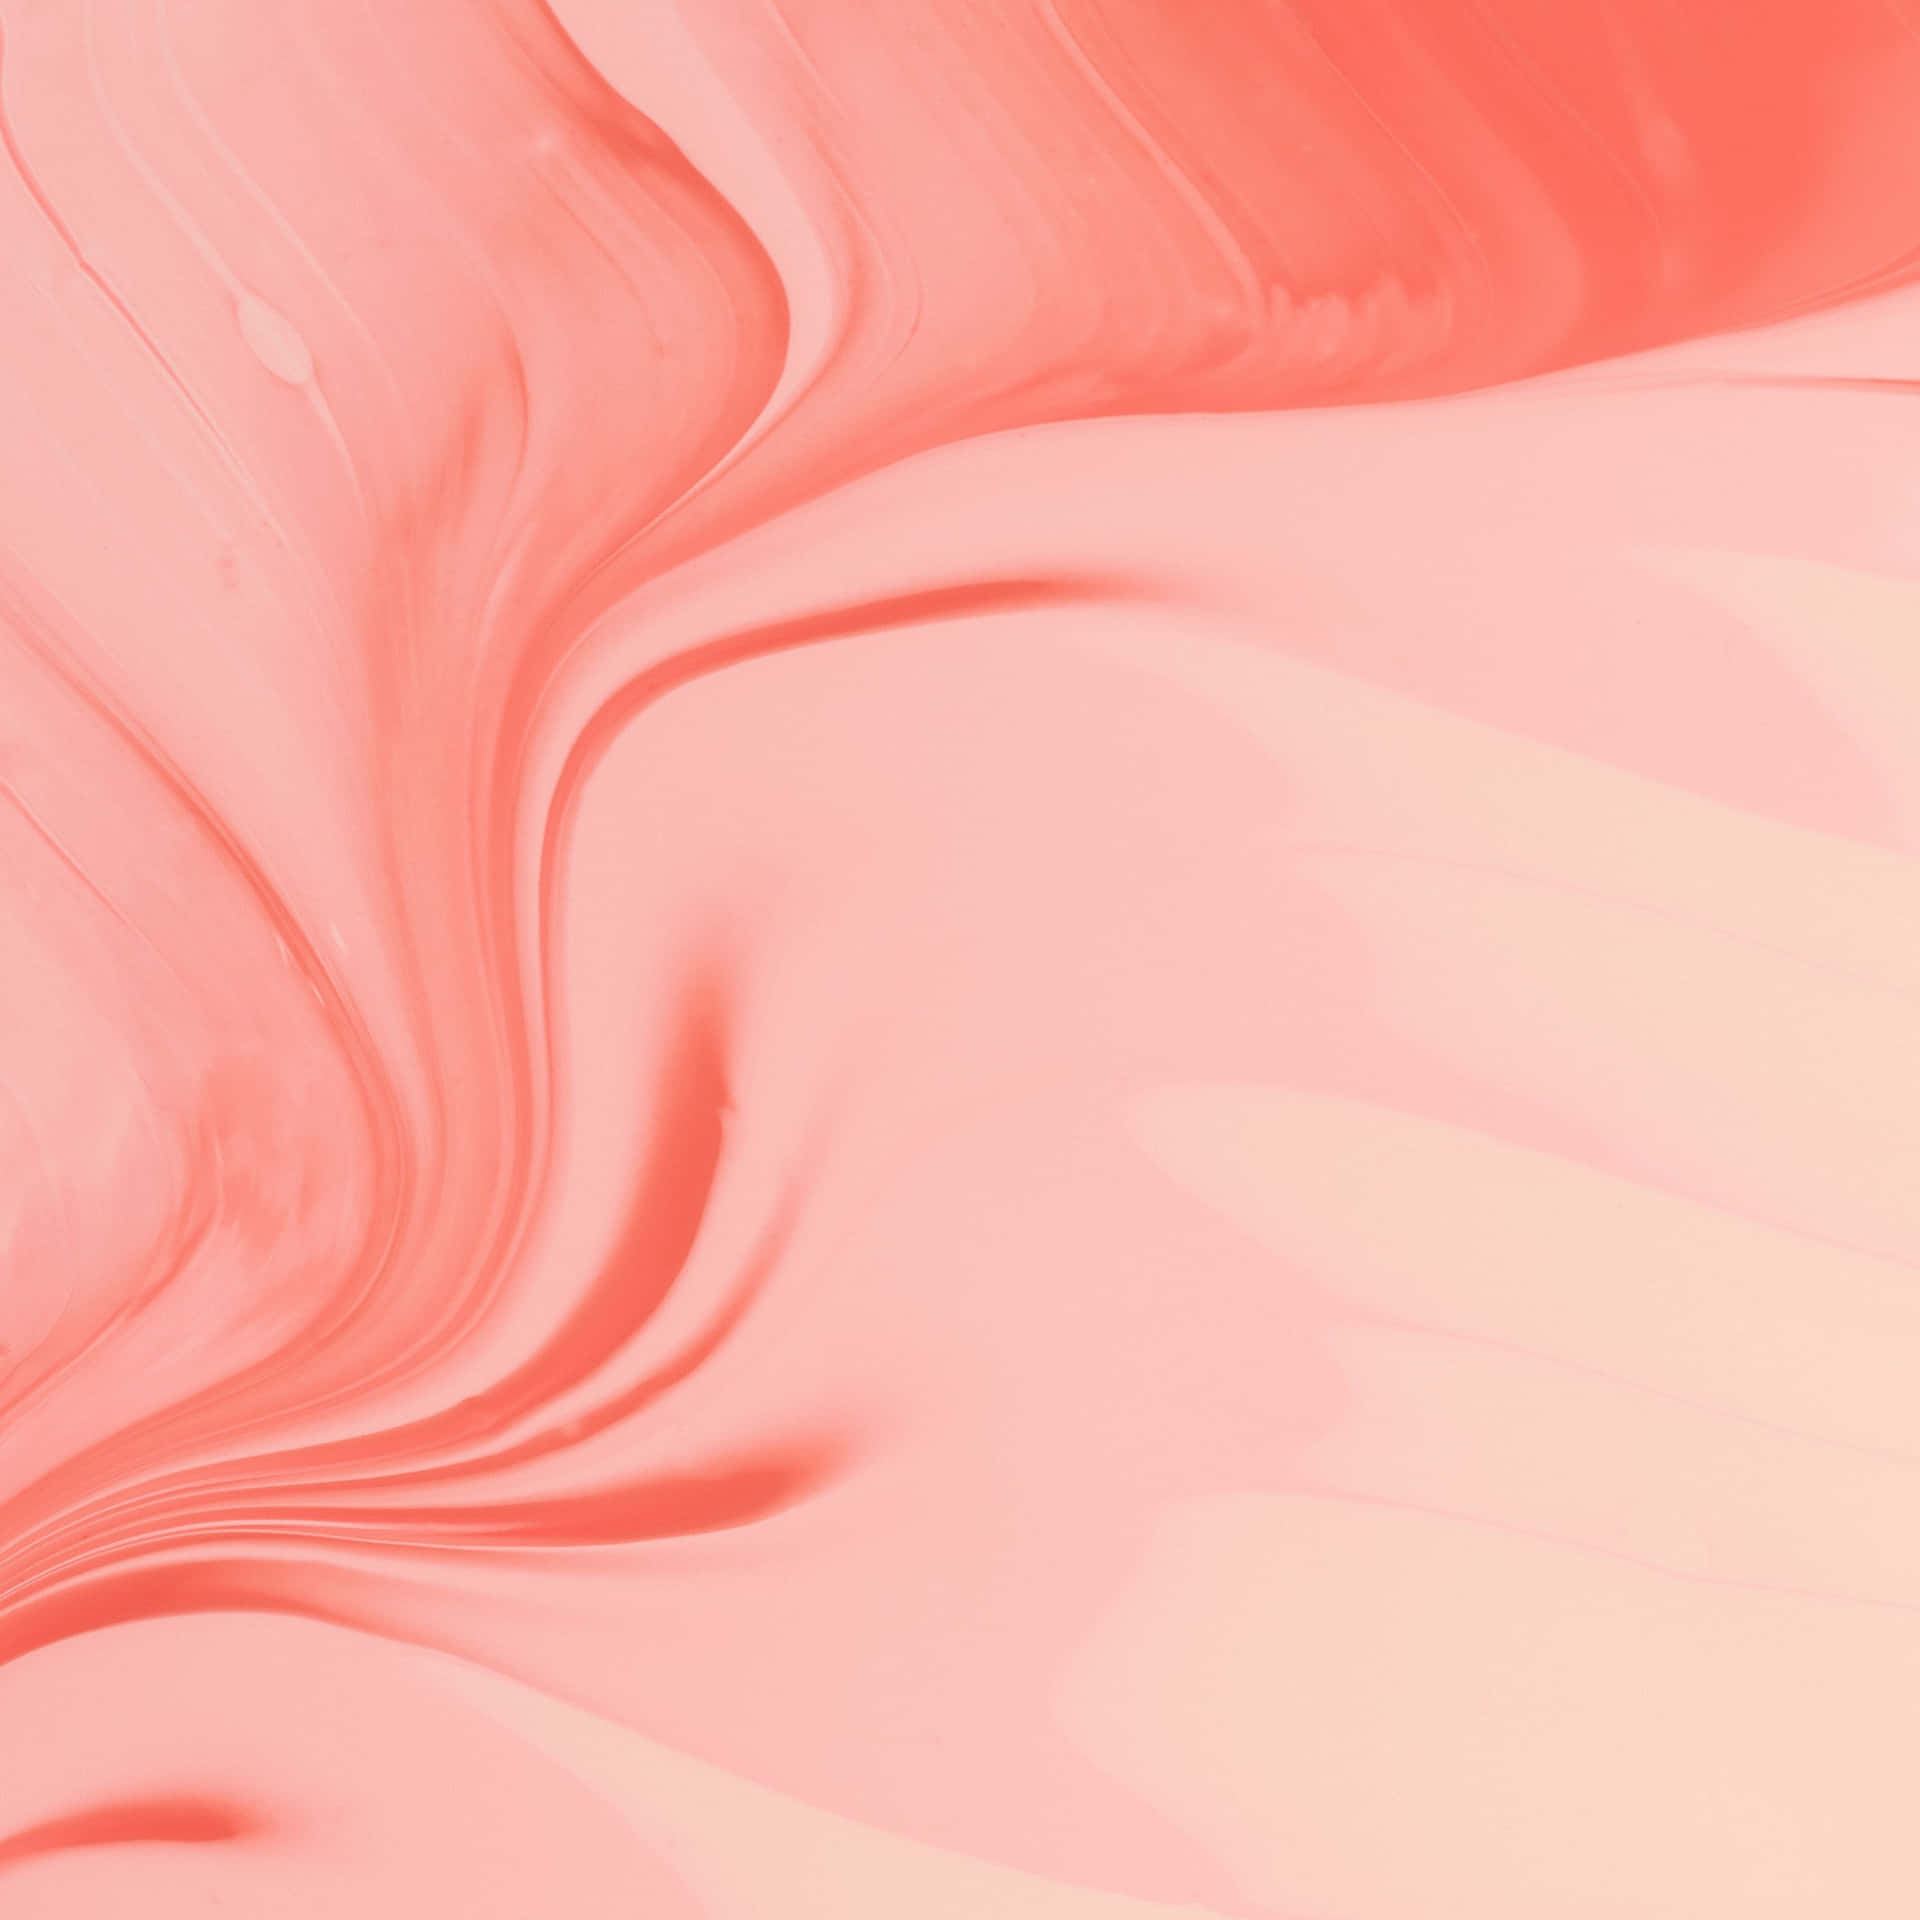 Coral Swirls Aesthetic Background Wallpaper